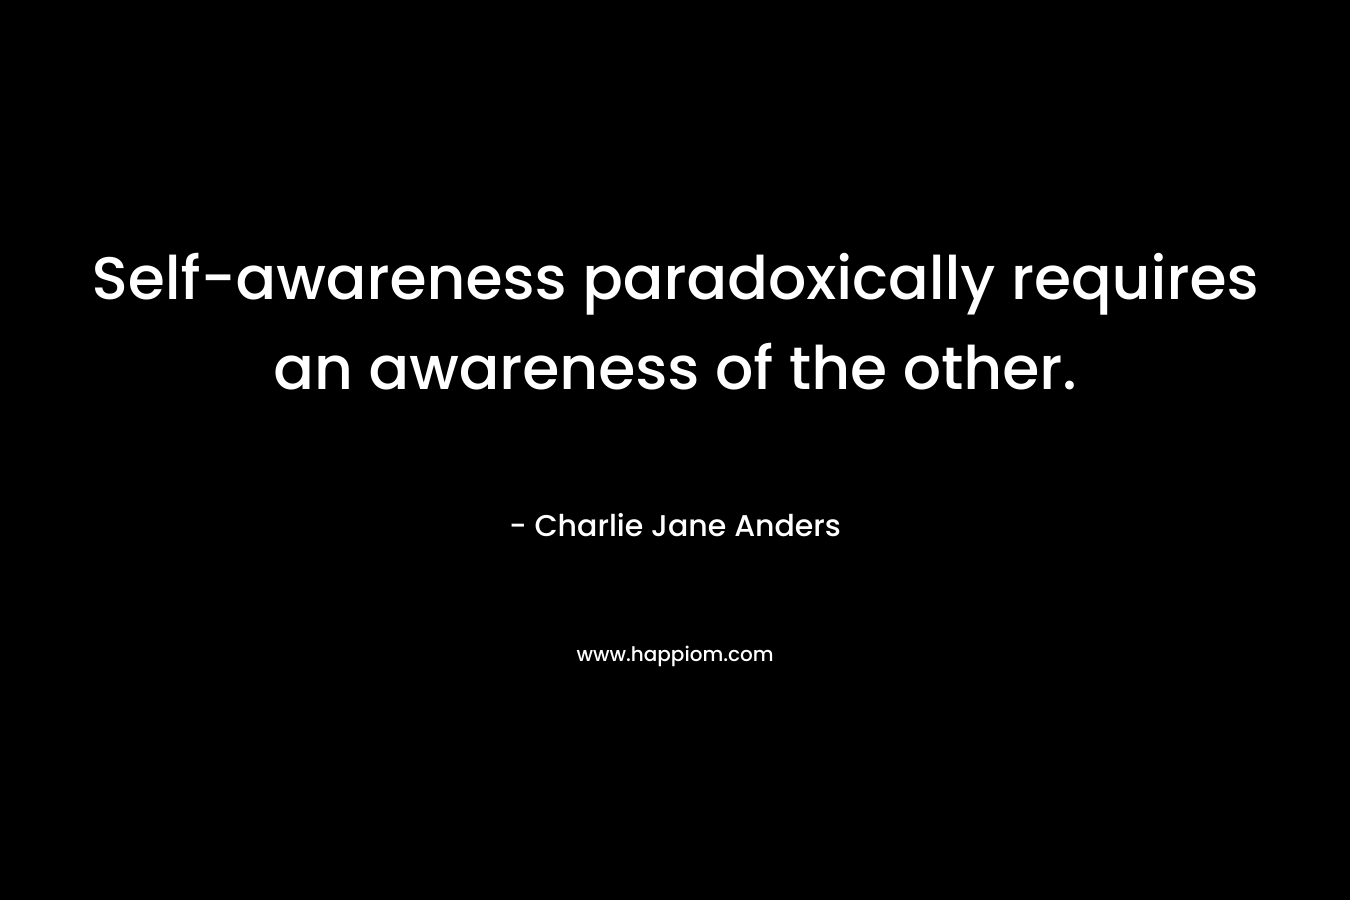 Self-awareness paradoxically requires an awareness of the other.